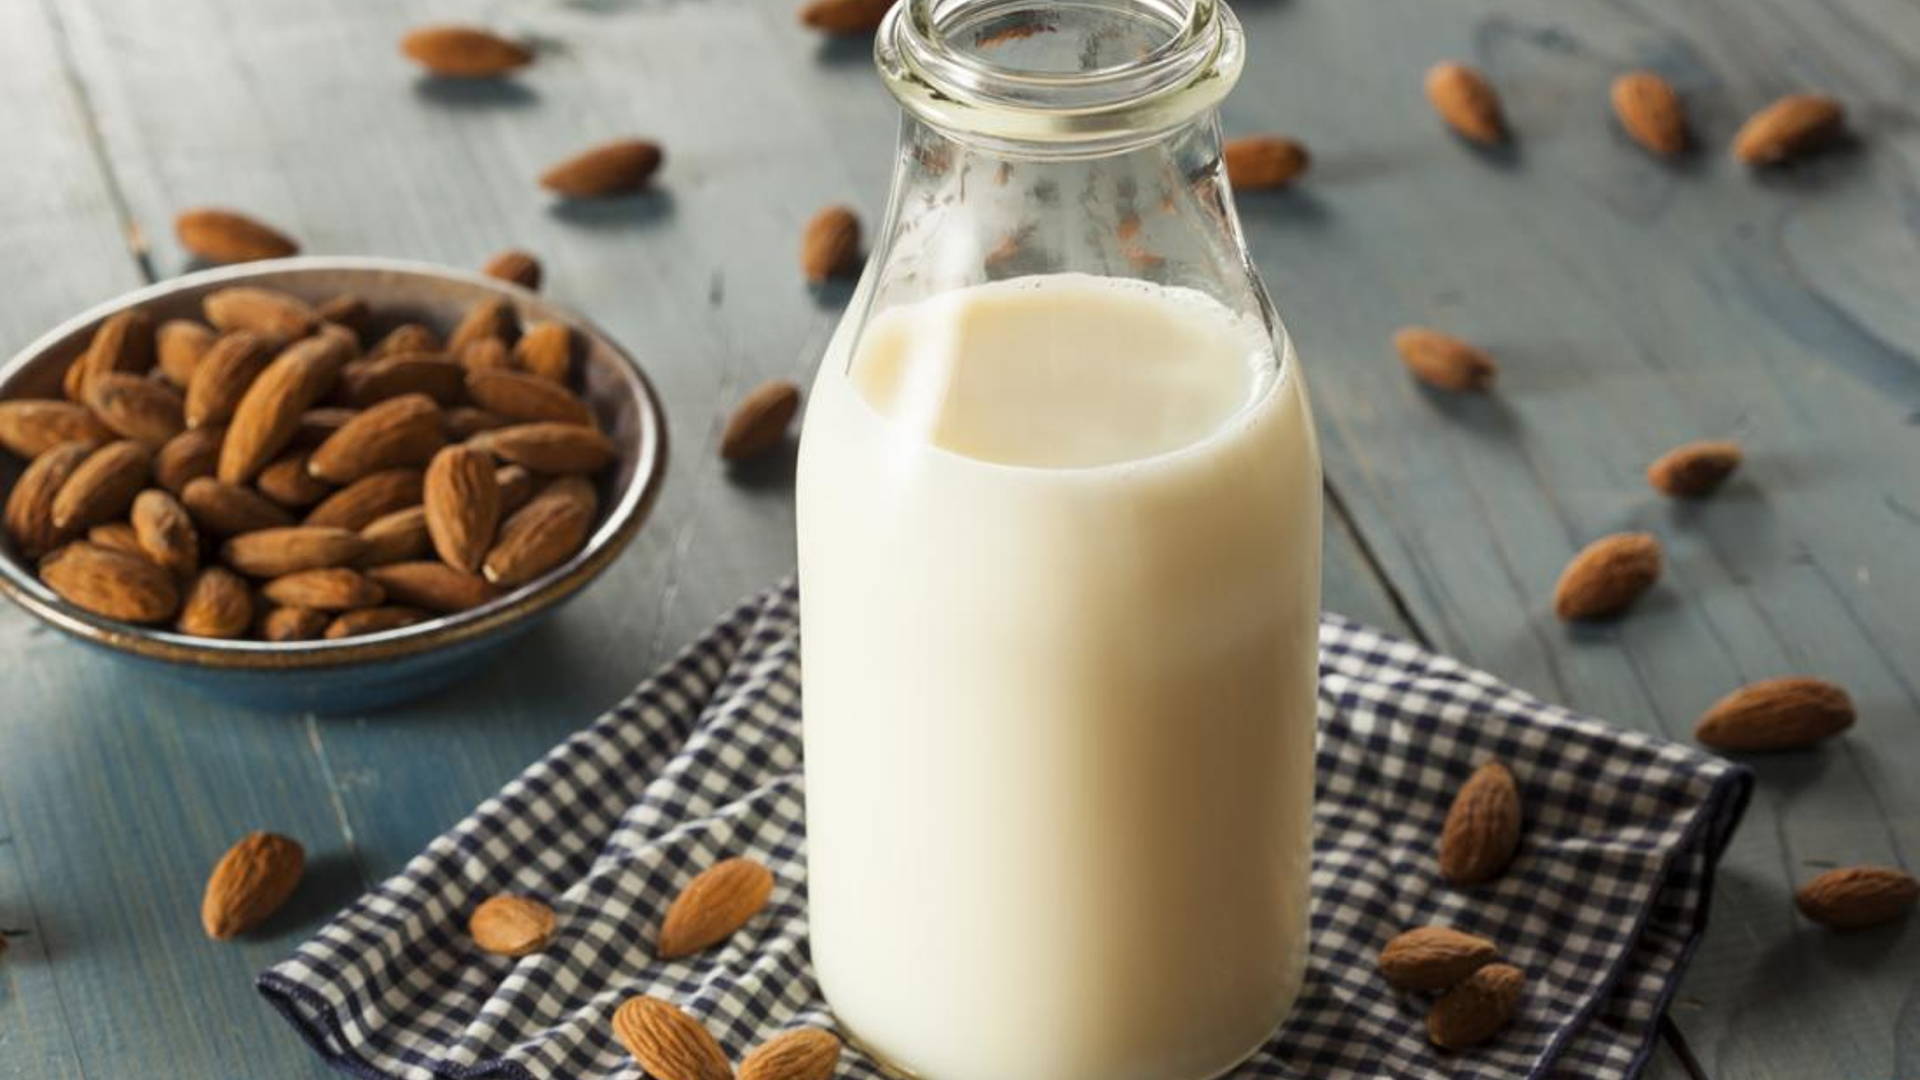 Featured image for Does An Almond Lactate? FDA Doesn't Want Your "Alt-Milk" To Be Called Milk Anymore.